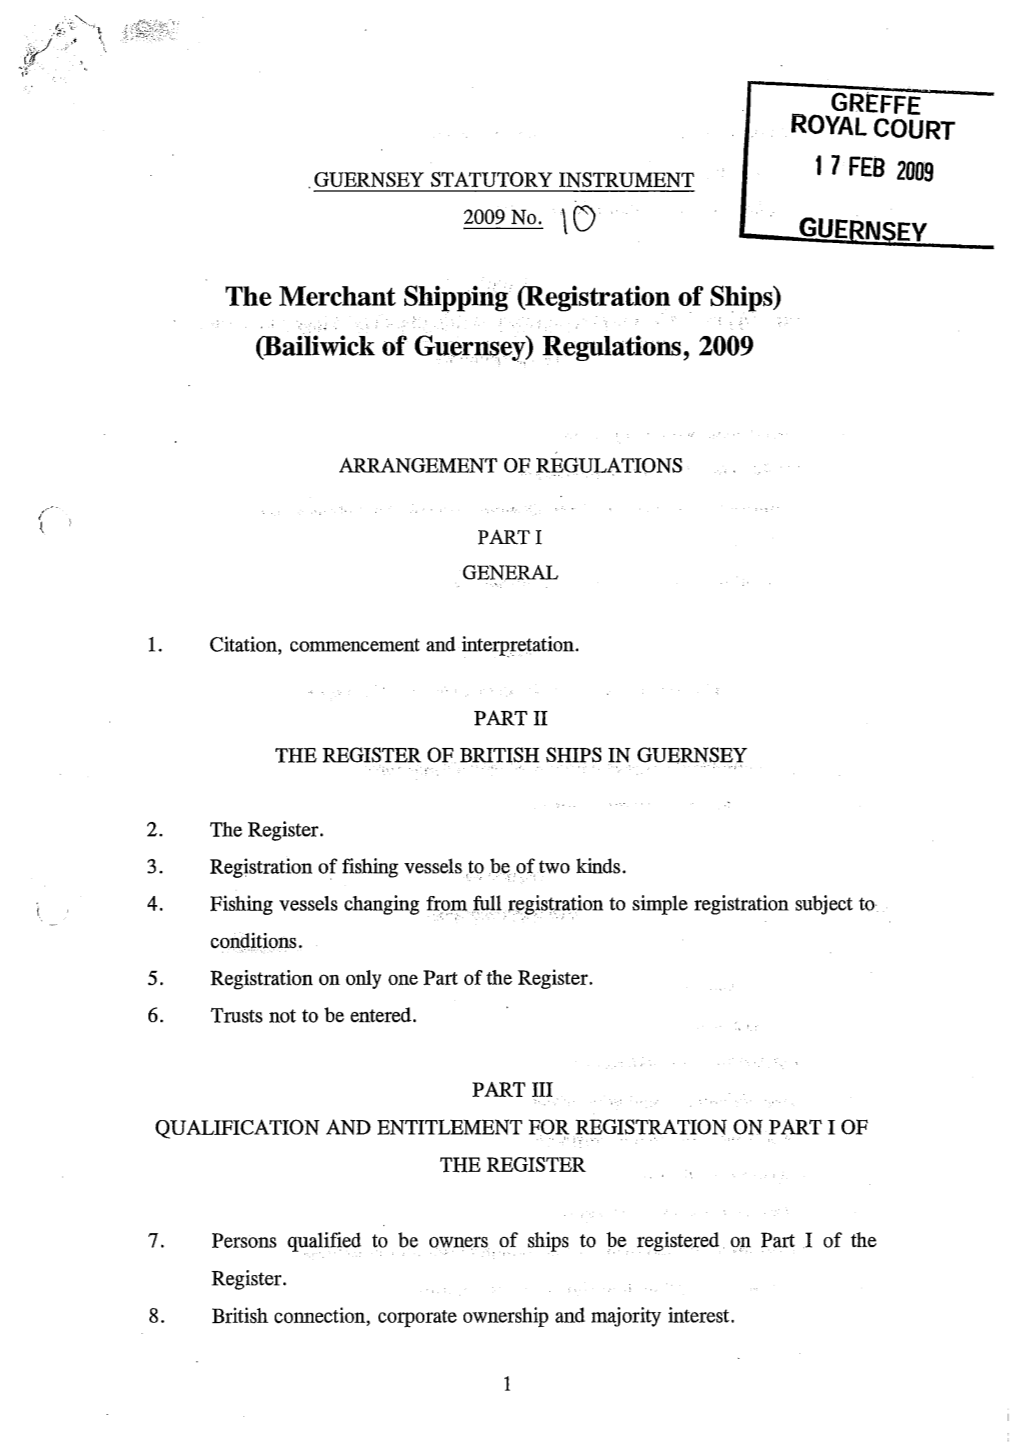 The Merchant Shipping (Registration of Ships) (Bailiwick of Guernsey) Regulations, 2009